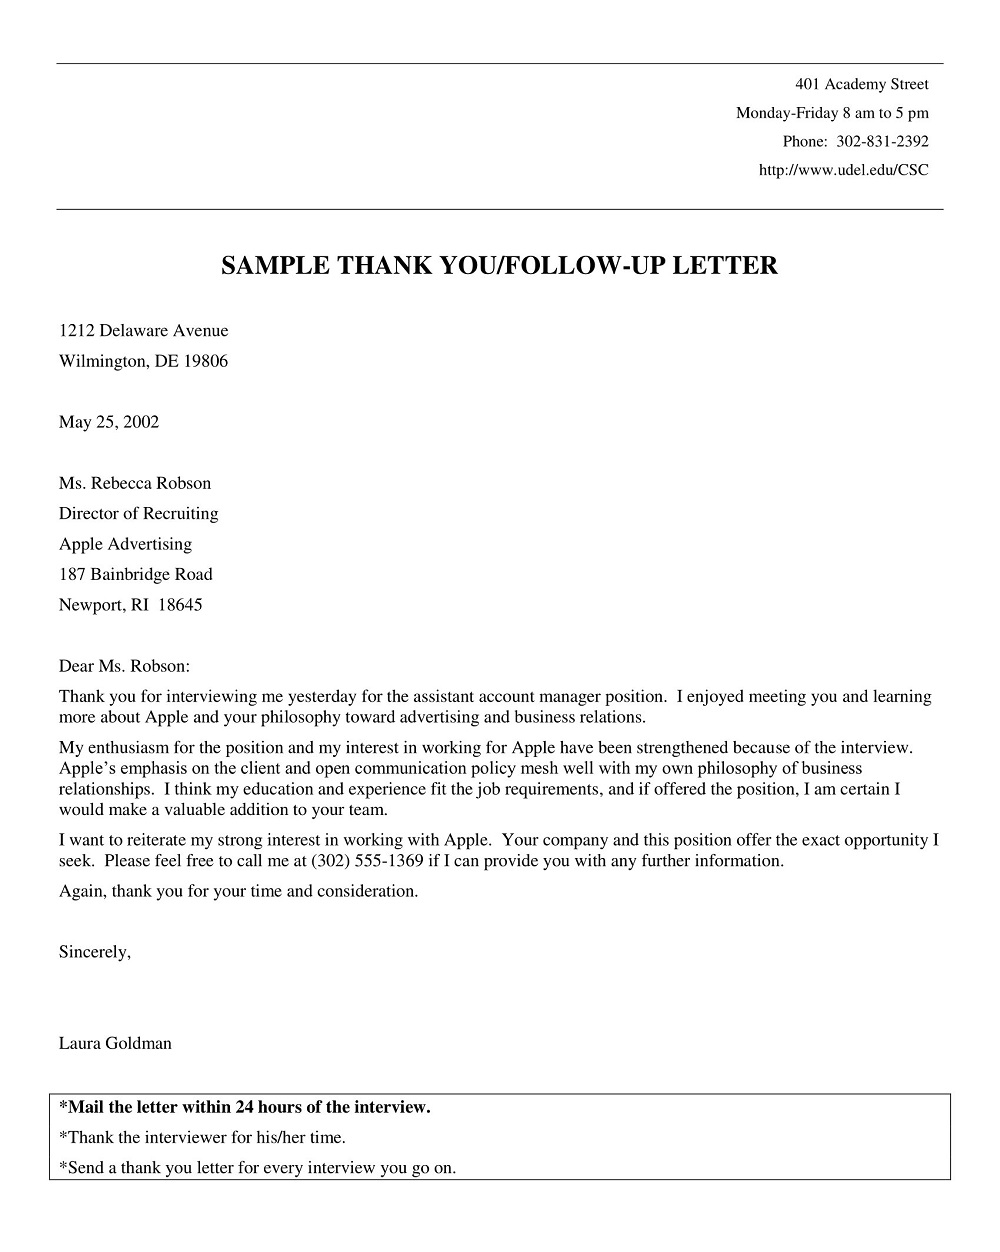 Follow-Up Letter Template PDF